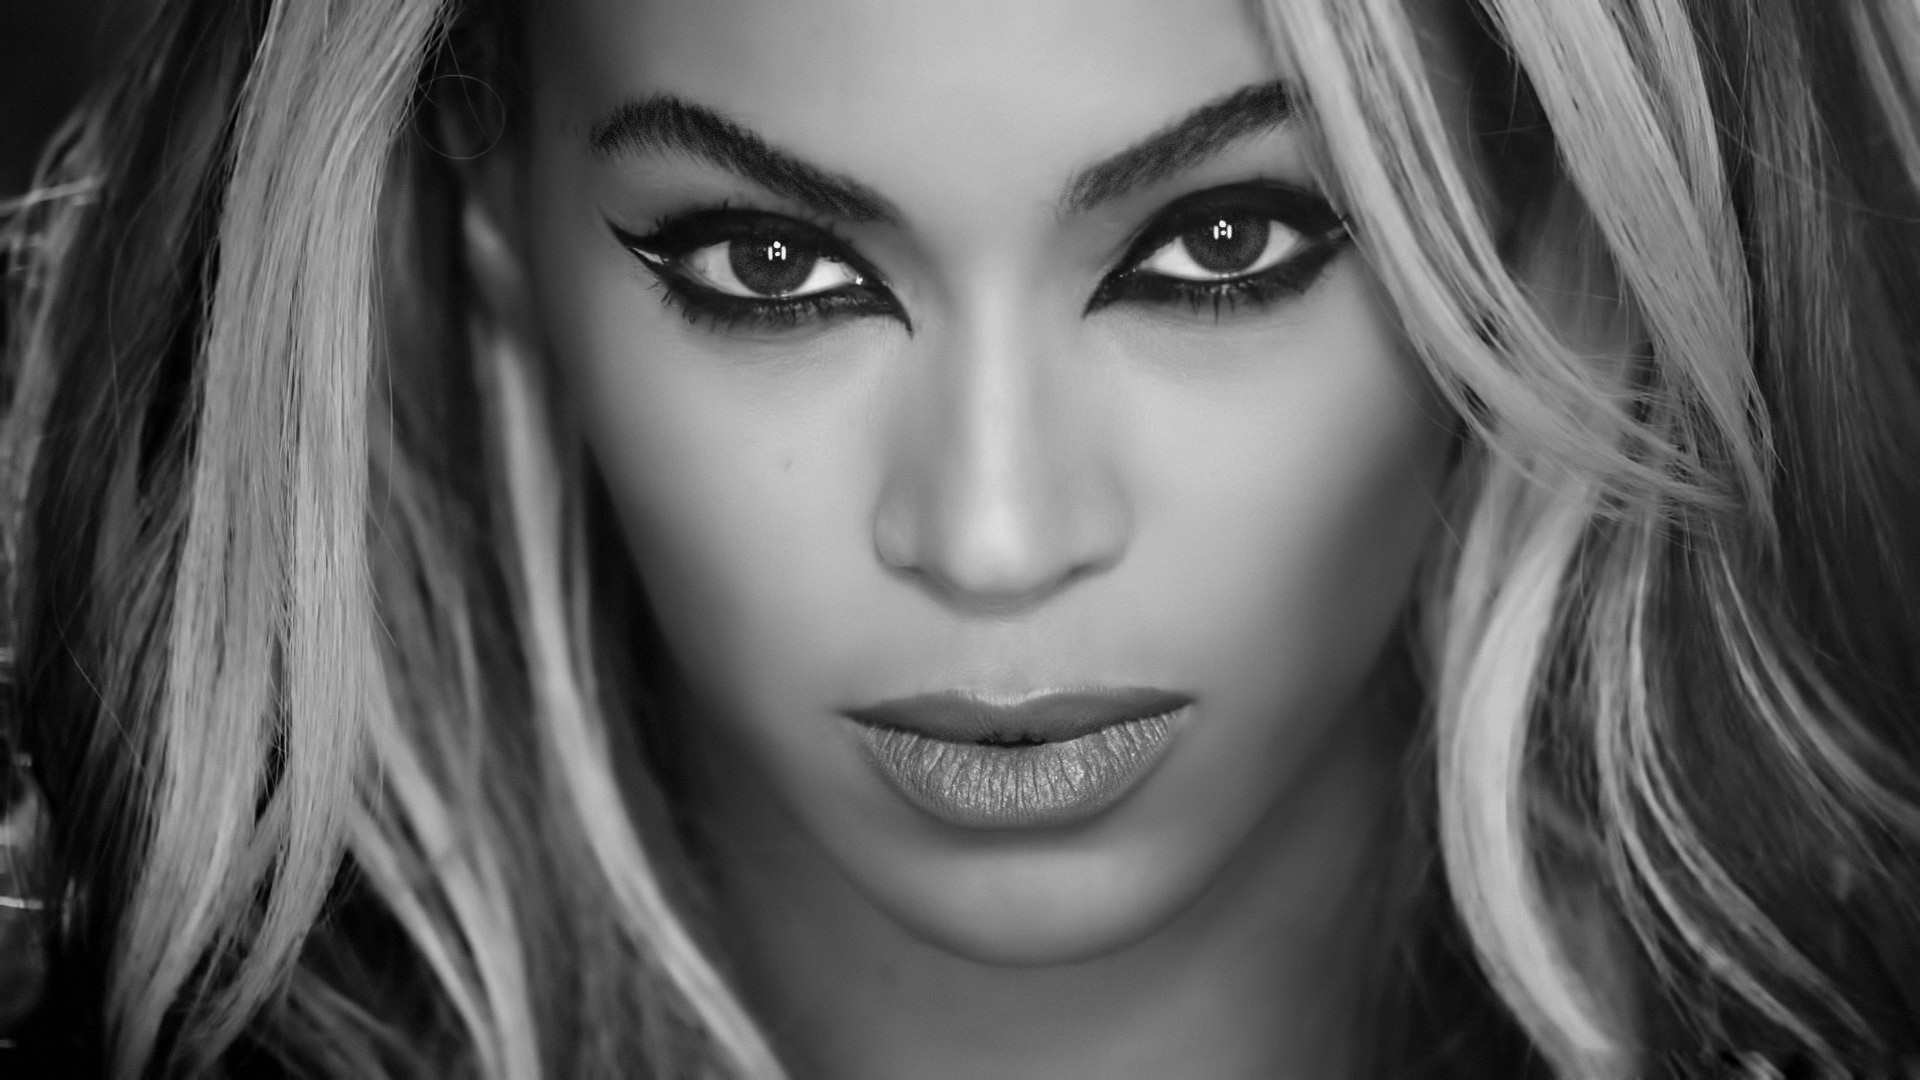 1920x1080 Free Beyonce Wallpapers - The Wallpaper ...